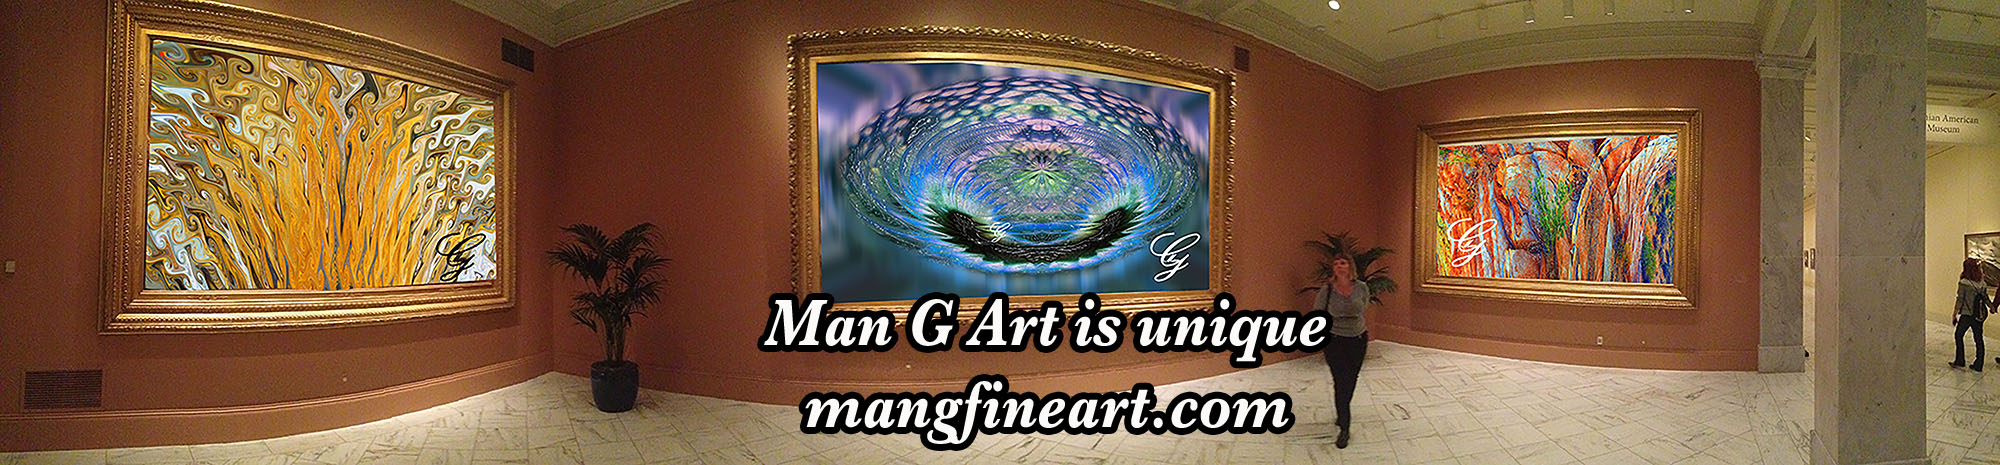 As you can see, Man G Art is a unique and non-reproducible Art and can be utilized in a variety of different forms and fashion.